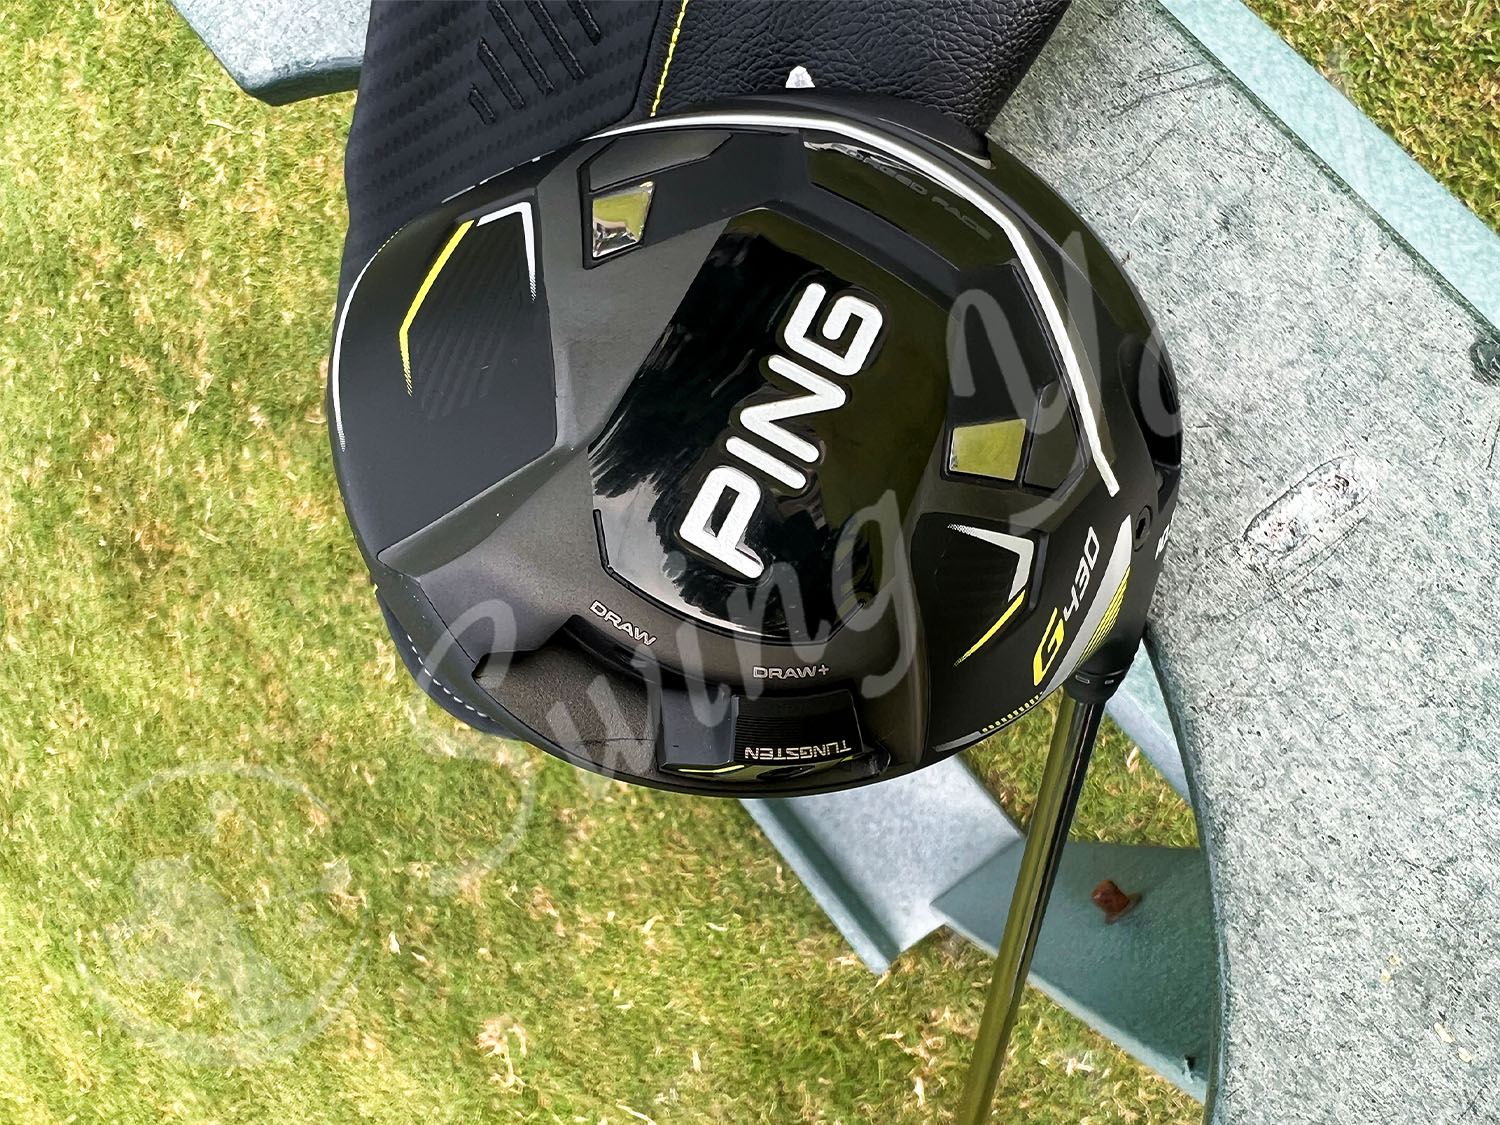 A closer view of my Ping G430 SFT Driver headclub at the golf course